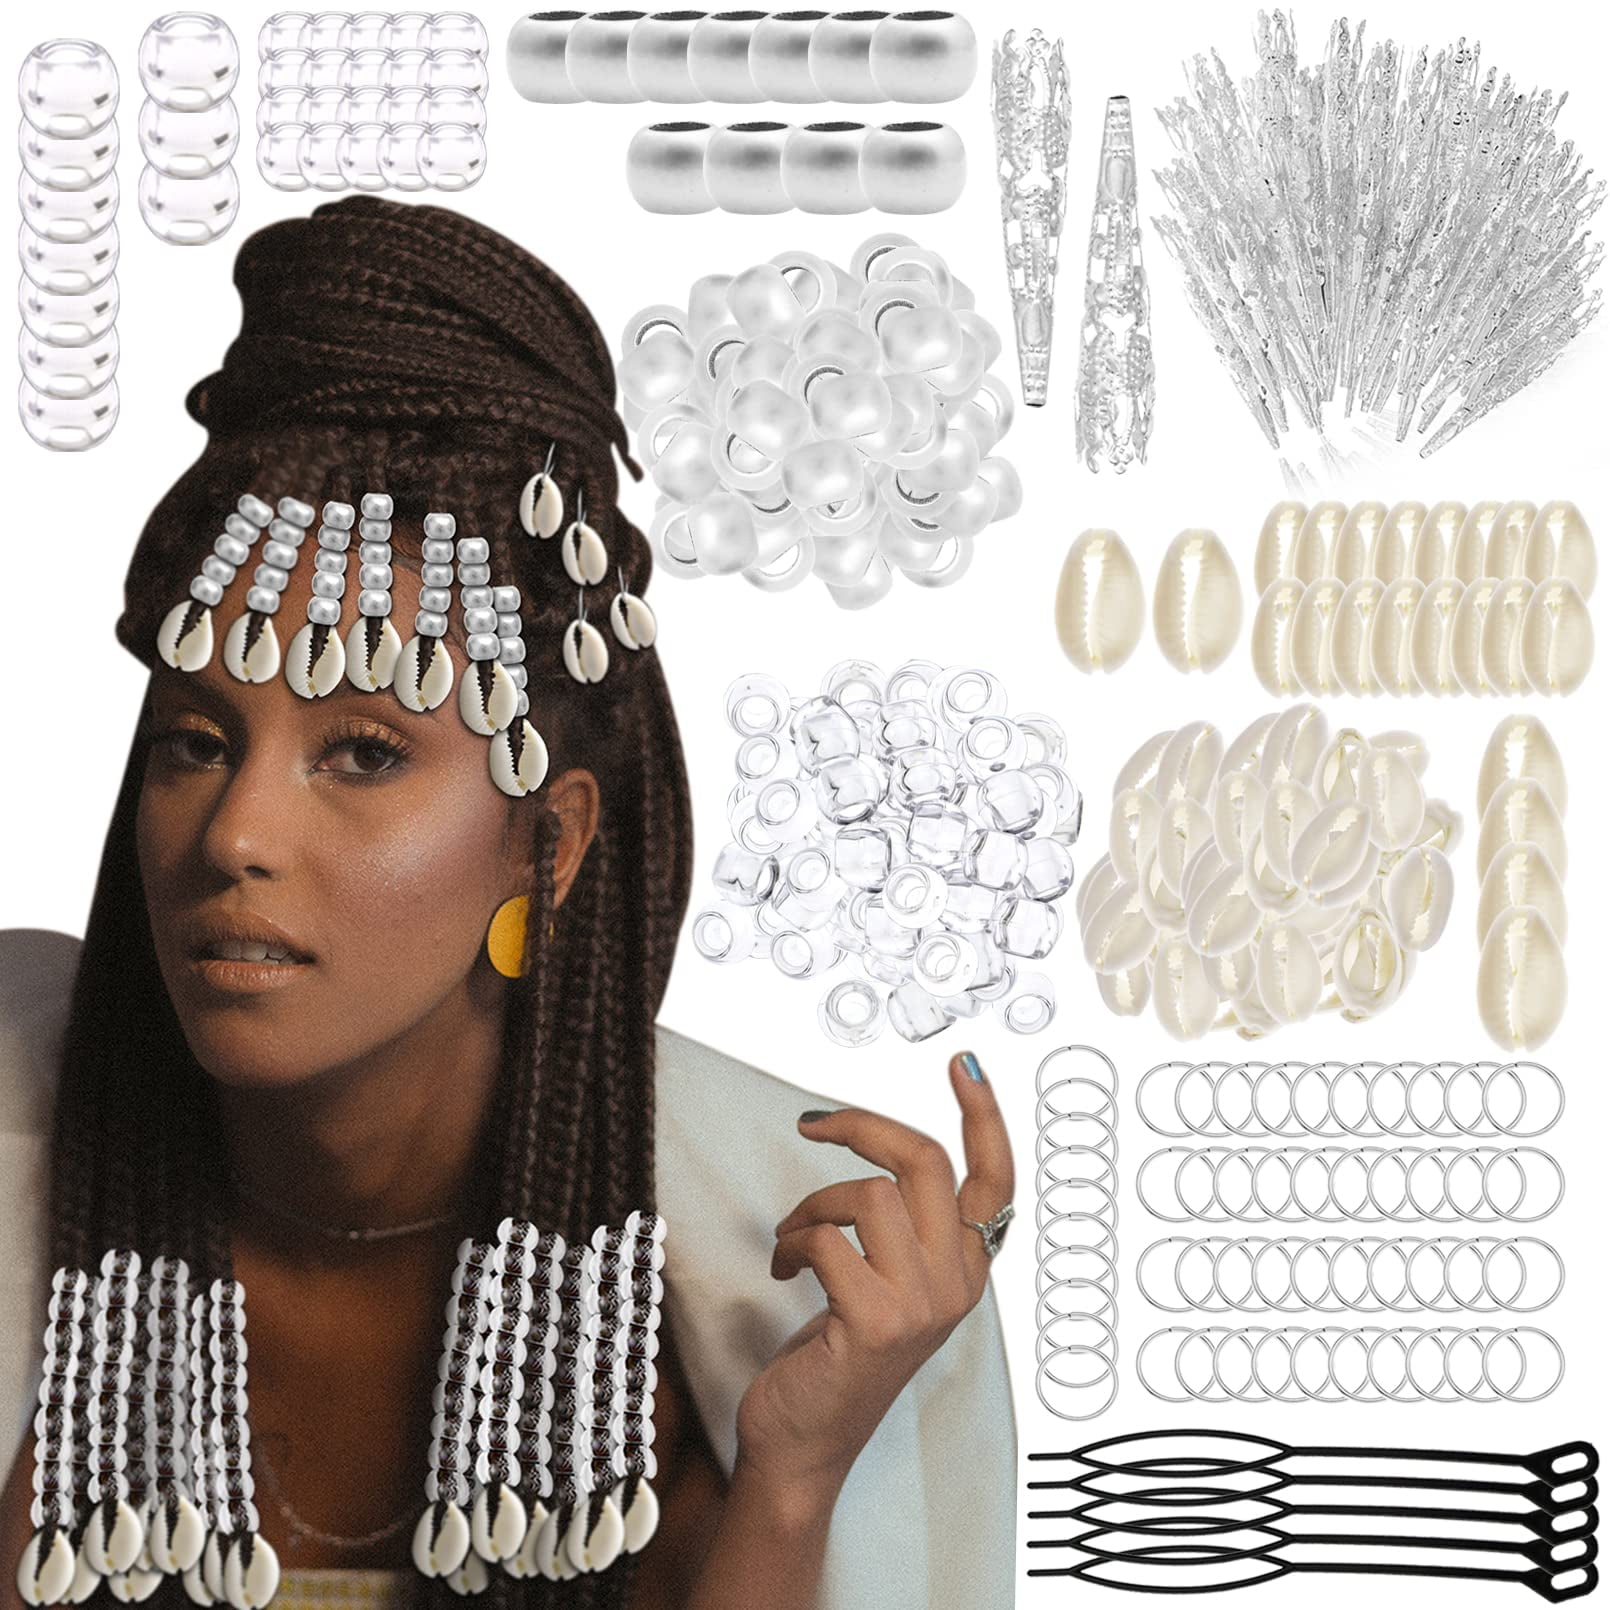 50pcs Colorful Hair Beads for Braids African Dreadlock Accessories